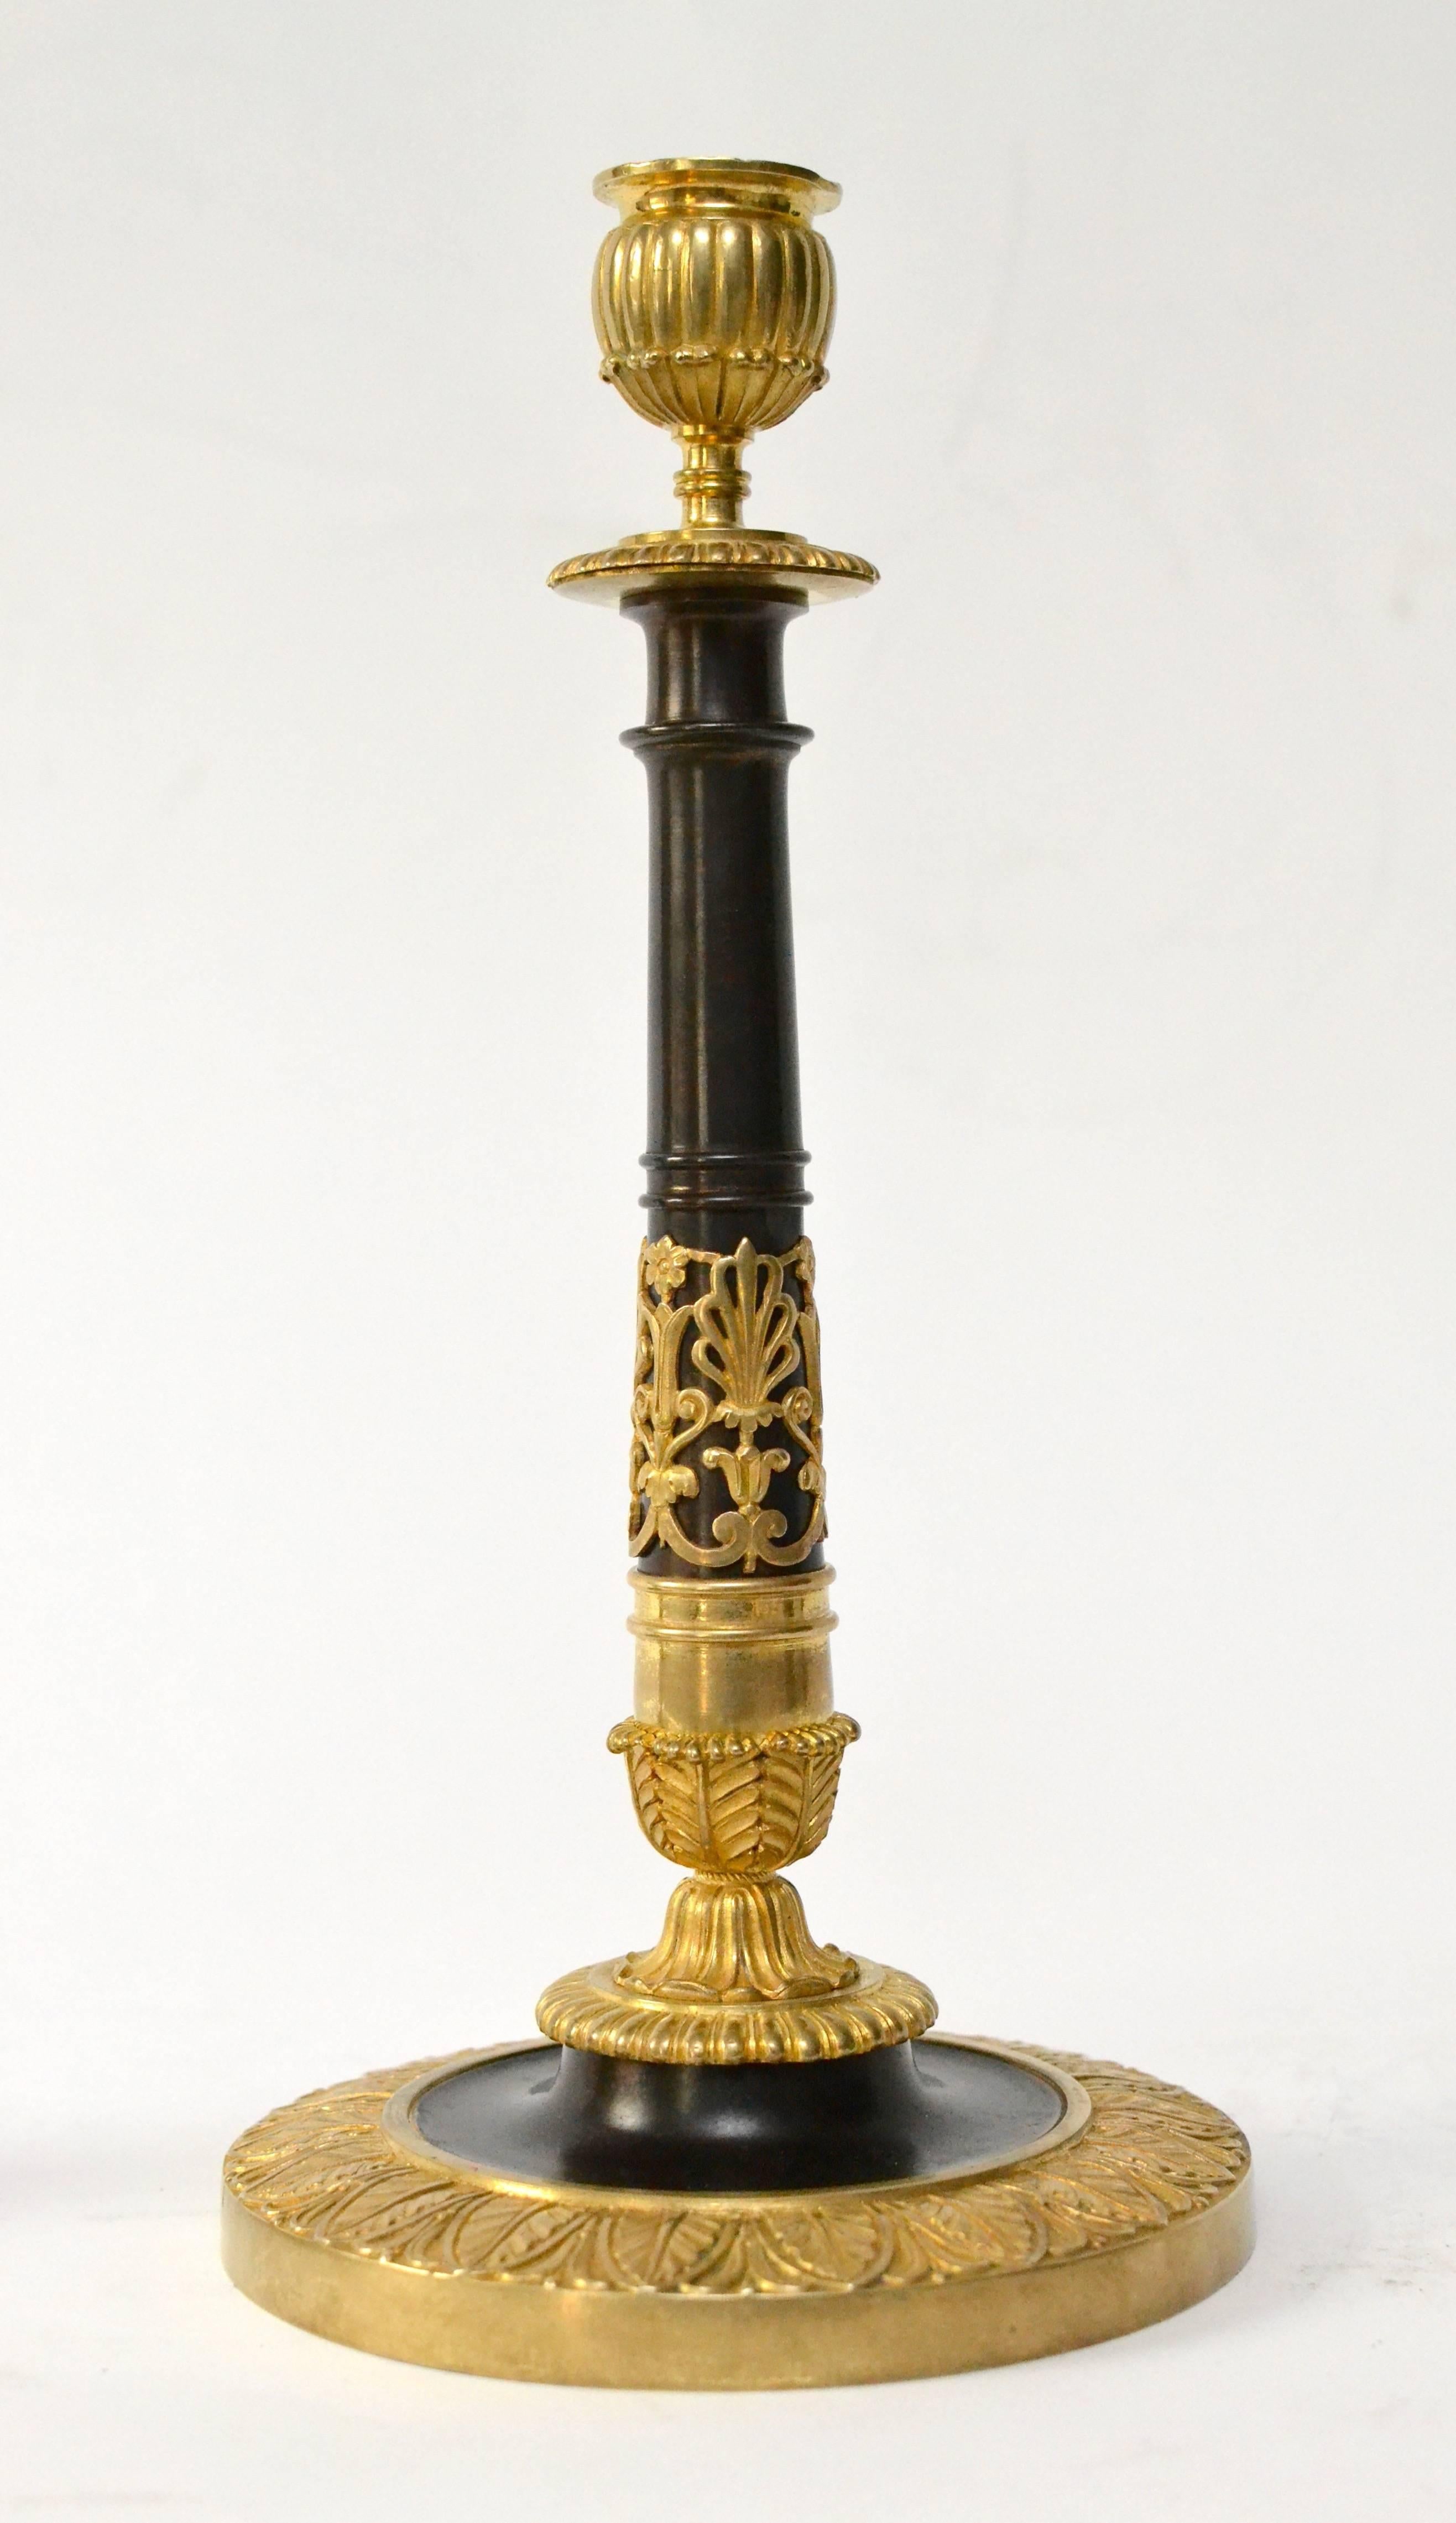 A pair of gilt and patinated bronze candlesticks, early 19th century.